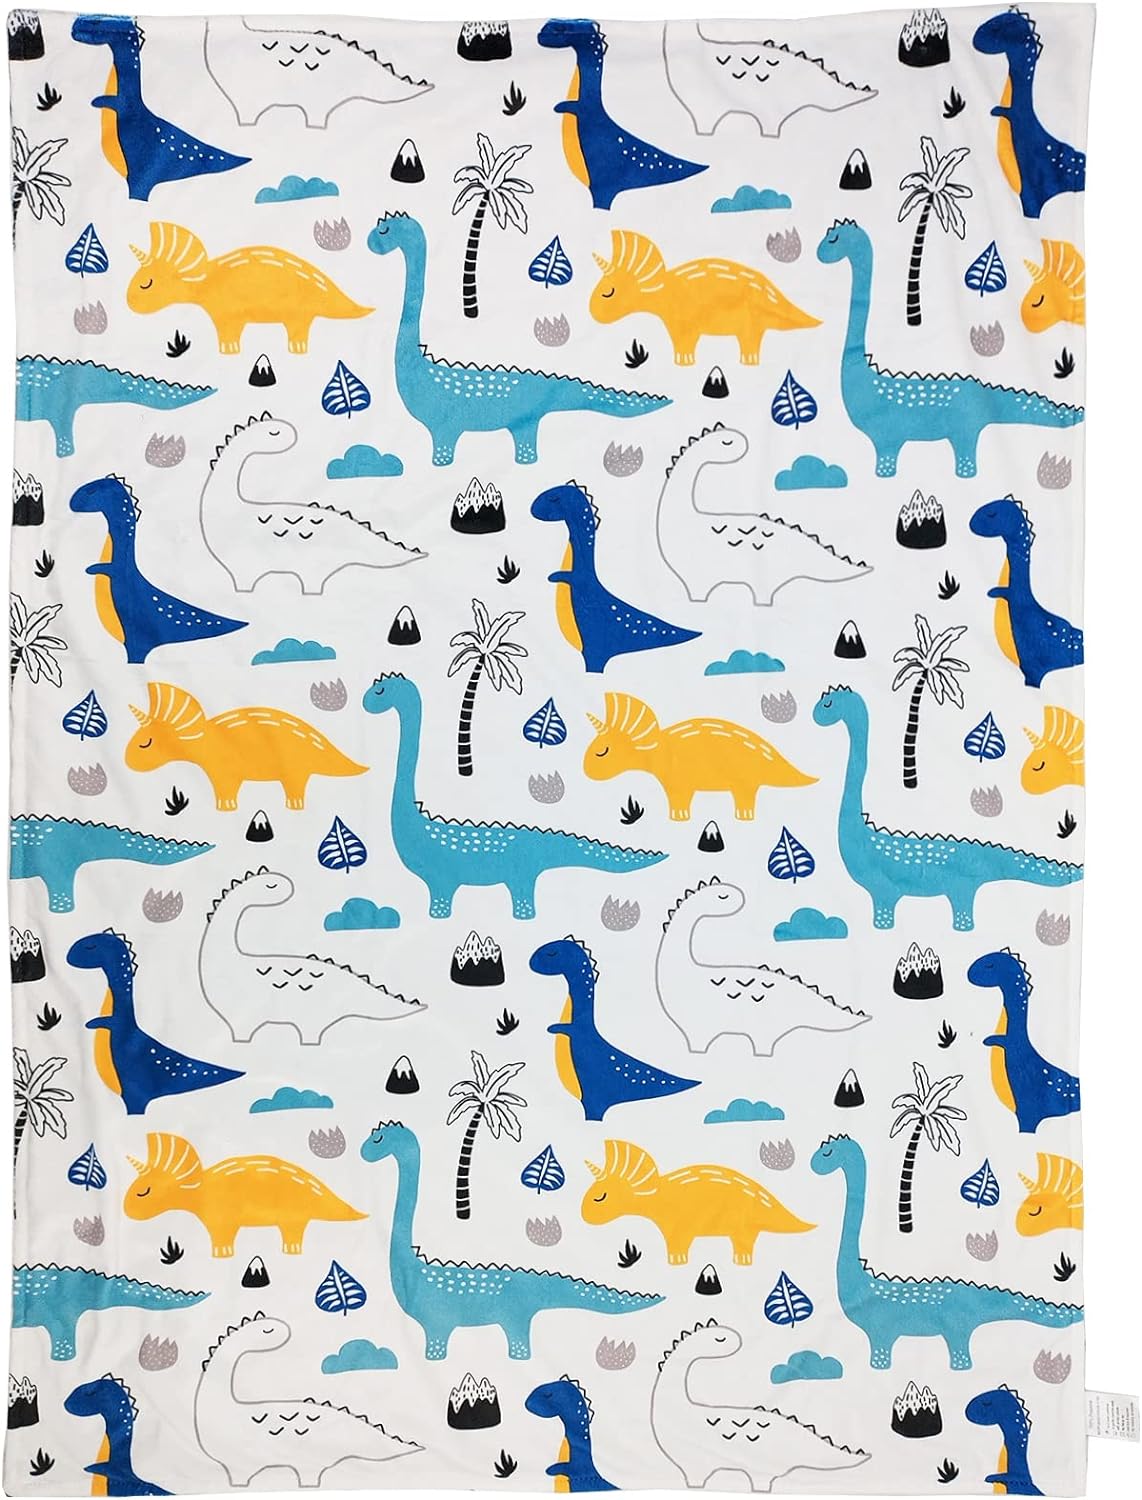 Baby Blanket for Boys Girls (Fox Printed, 30"x40") with Double Layer Dotted Backing Soft Plush Minky Blanket for Toddlers Newborn